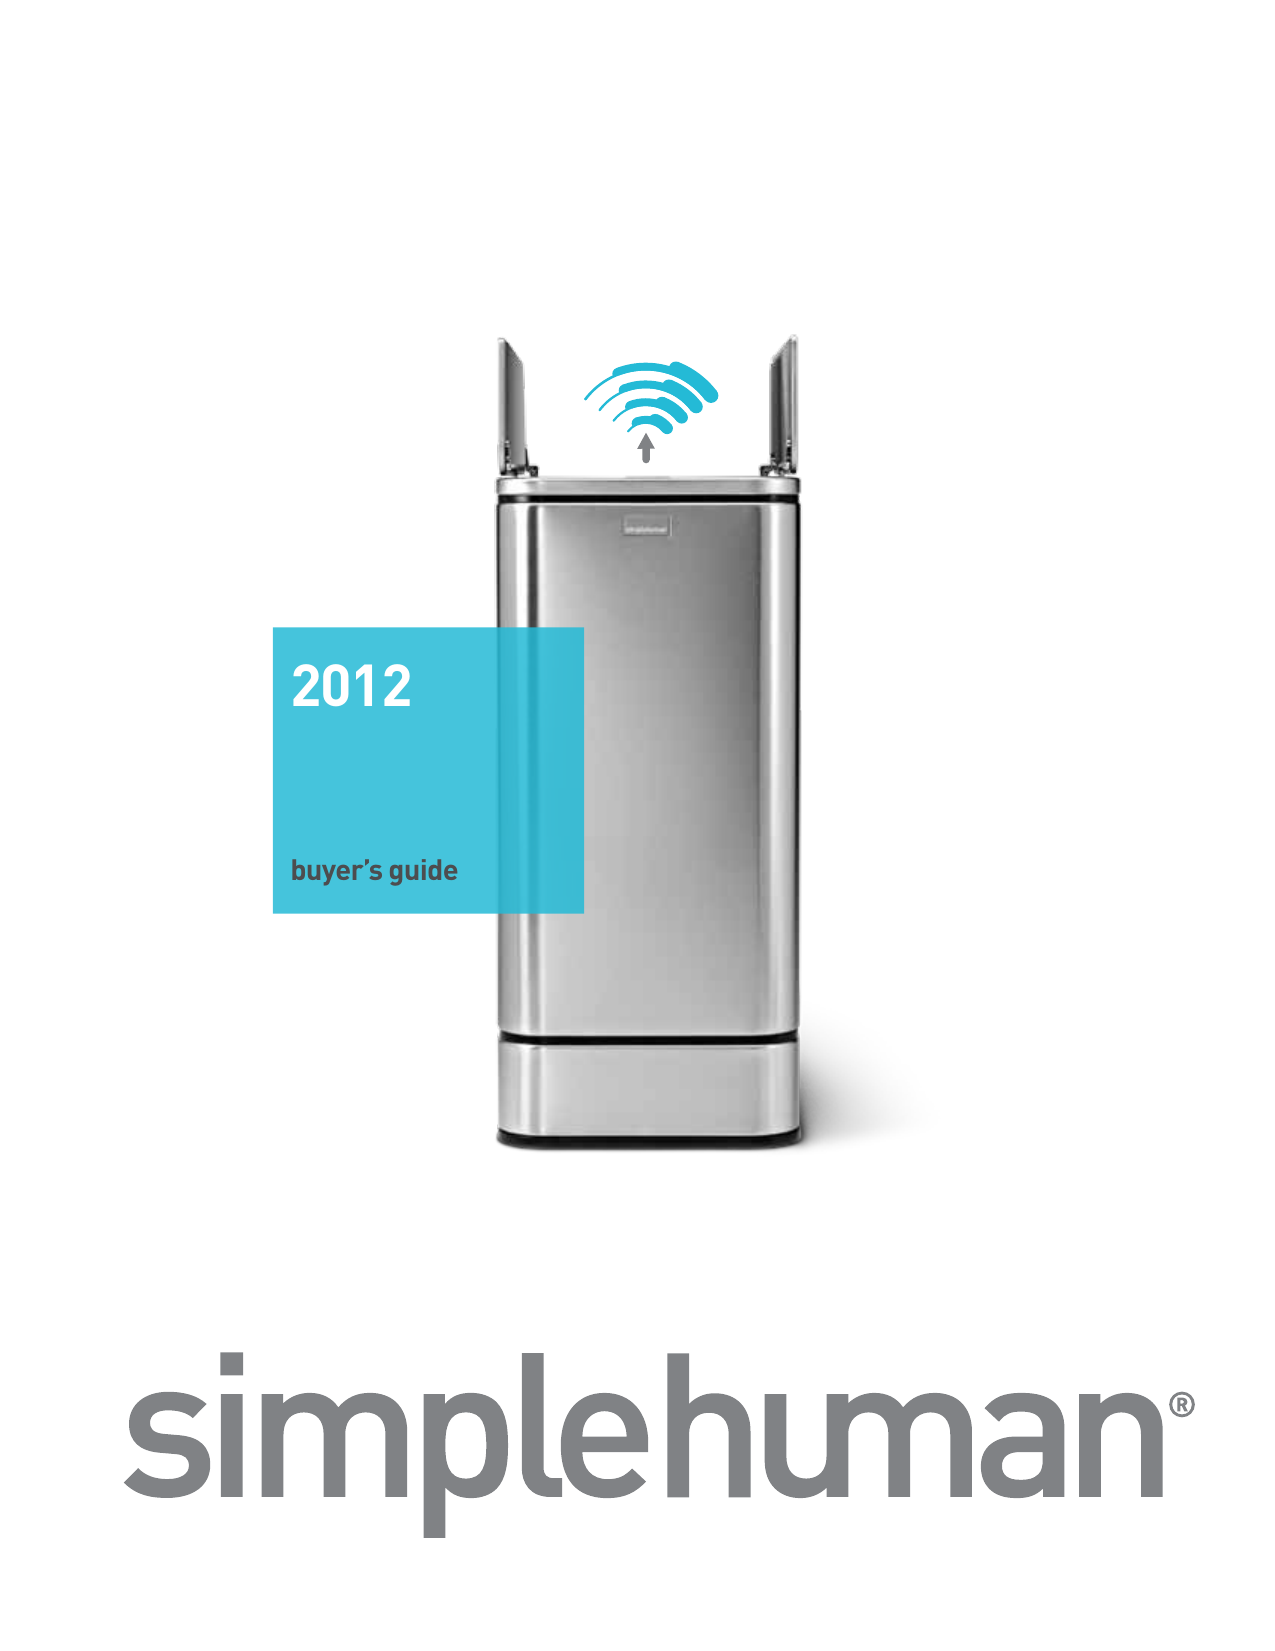 Where is my serial number located? – simplehuman